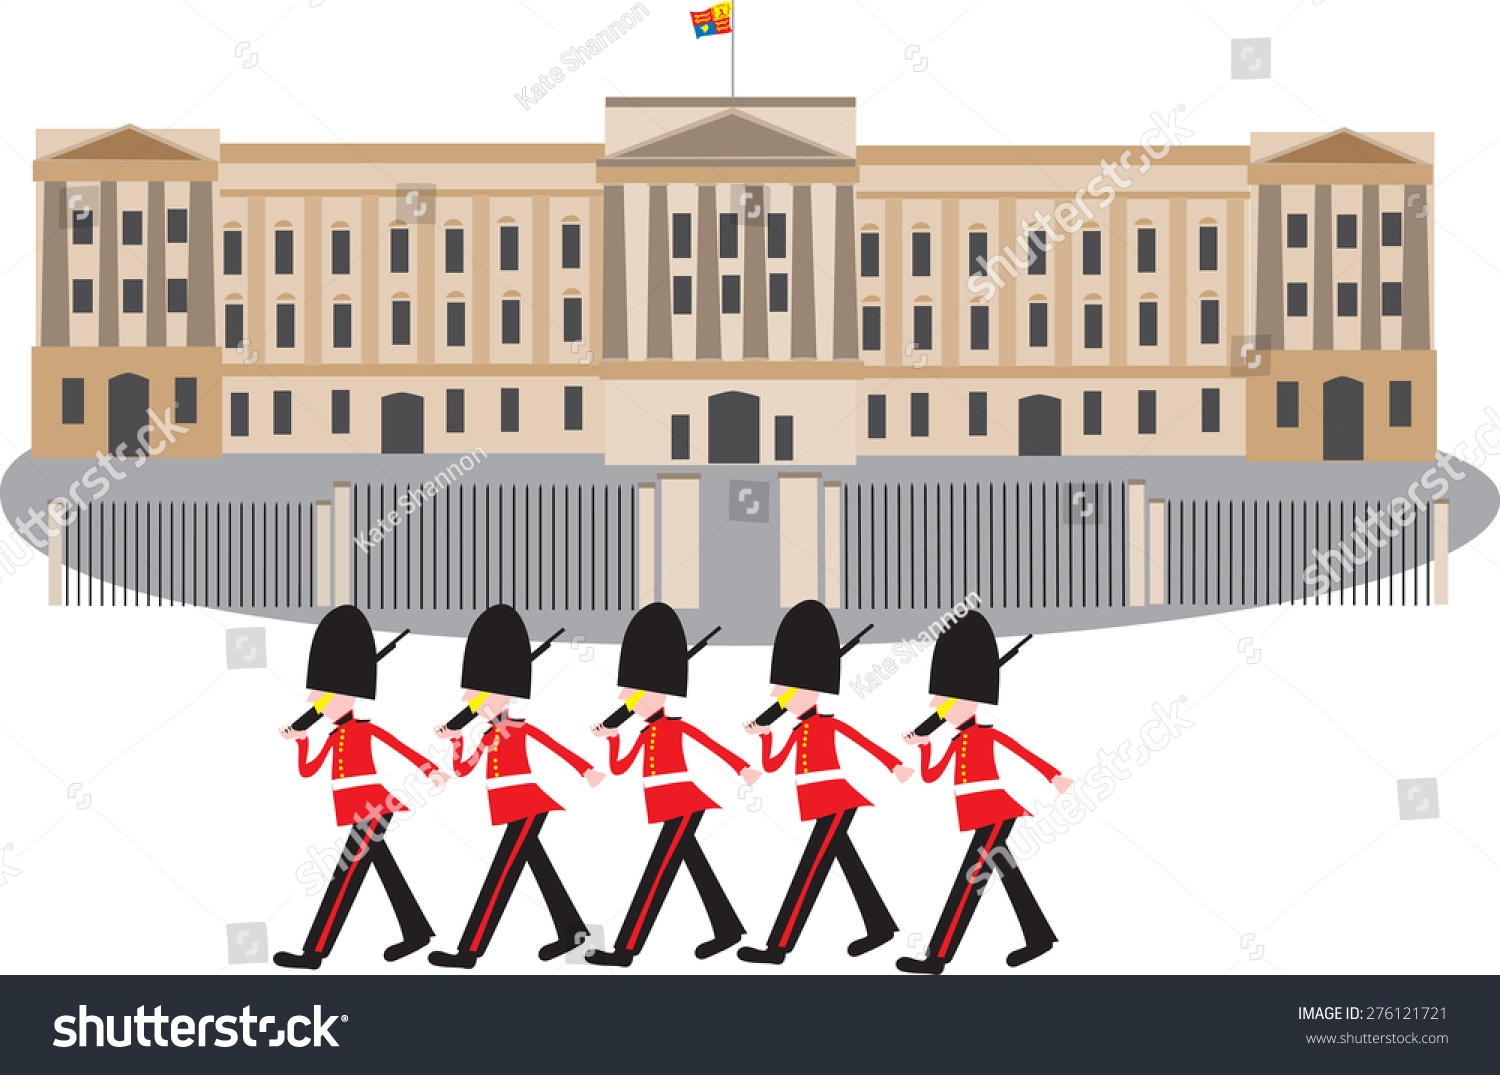 SVG of A cartoon Buckingham Palace with guards in bearskin hats marching in front of the gates svg